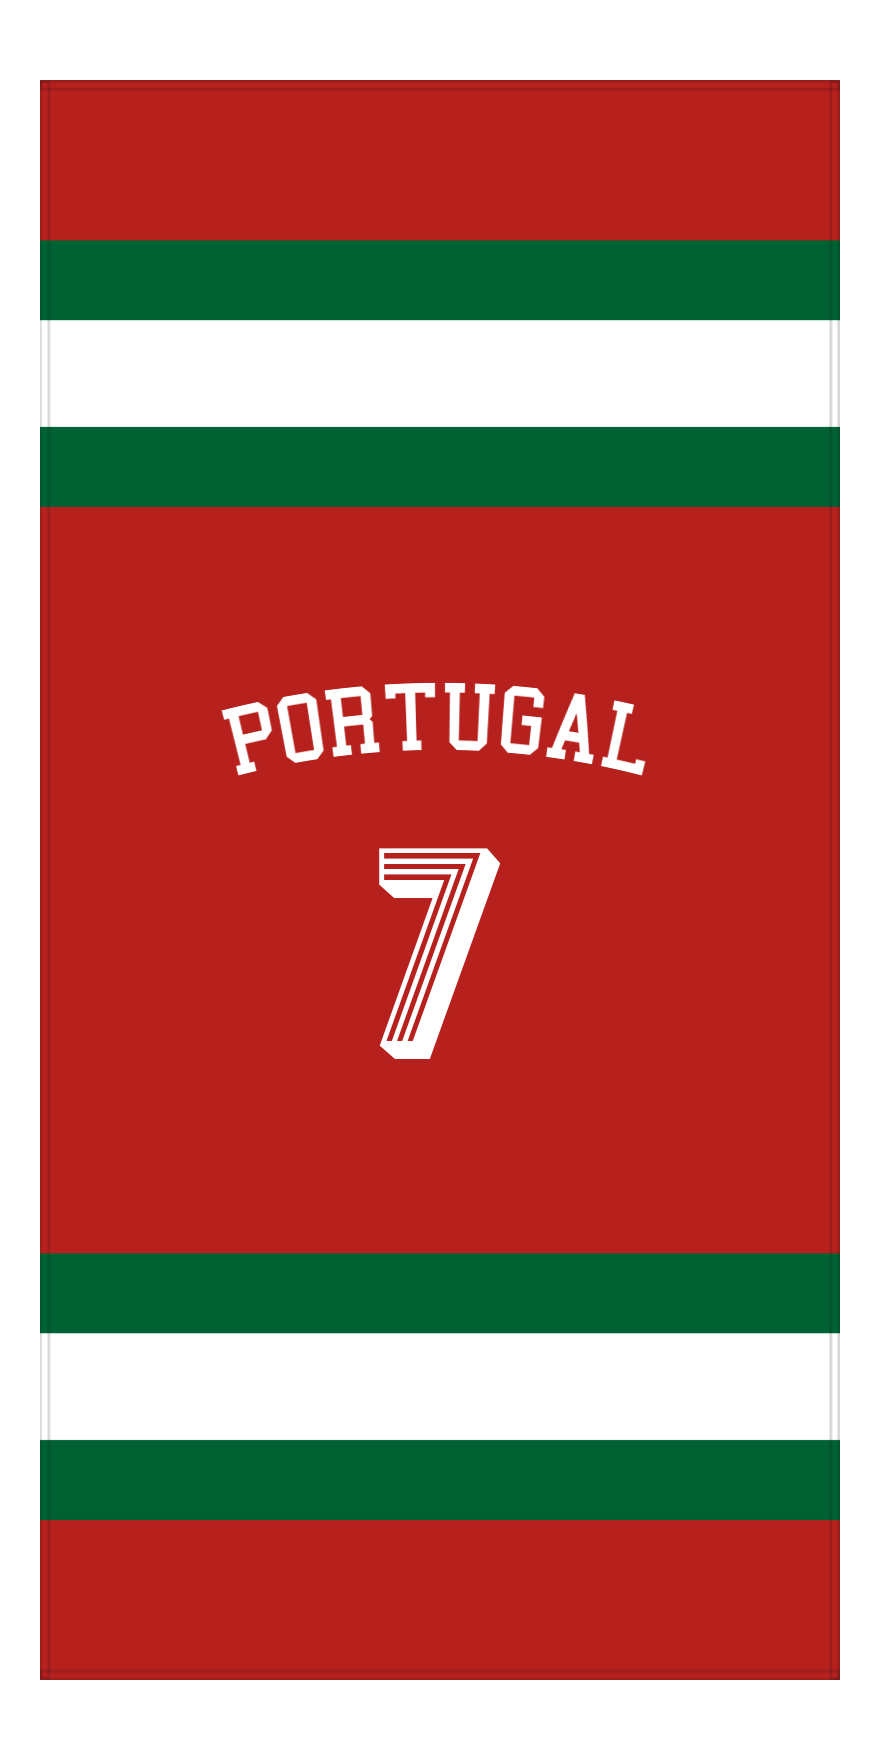 Personalized Jersey Number 1-on-1 Stripes Sports Beach Towel with Arched Name - Portugal - Vertical Design - Front View